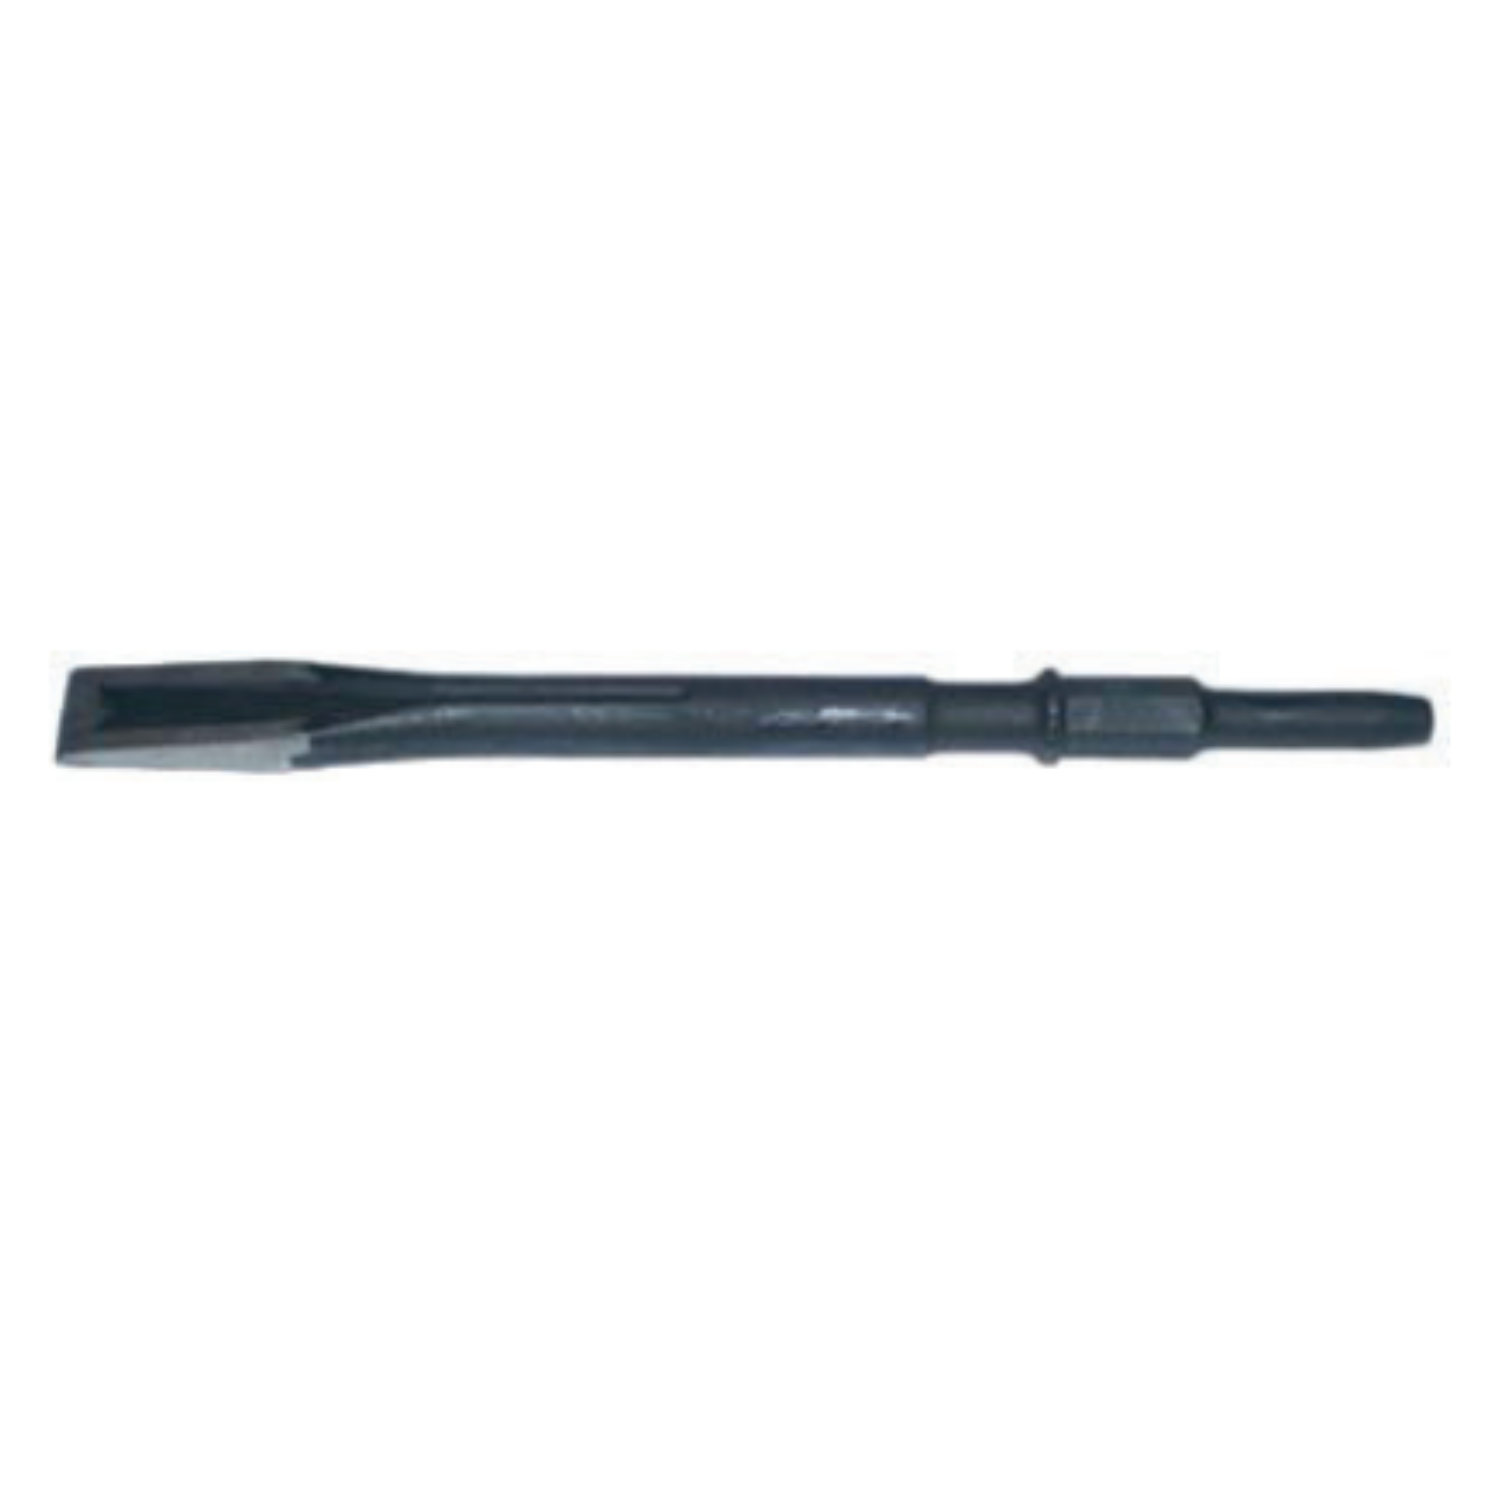 YEW AIK AB00248 Cold Chisel/Flat Chisel (YEW AIK Tools) - Premium Cold Chisel from YEW AIK - Shop now at Yew Aik.